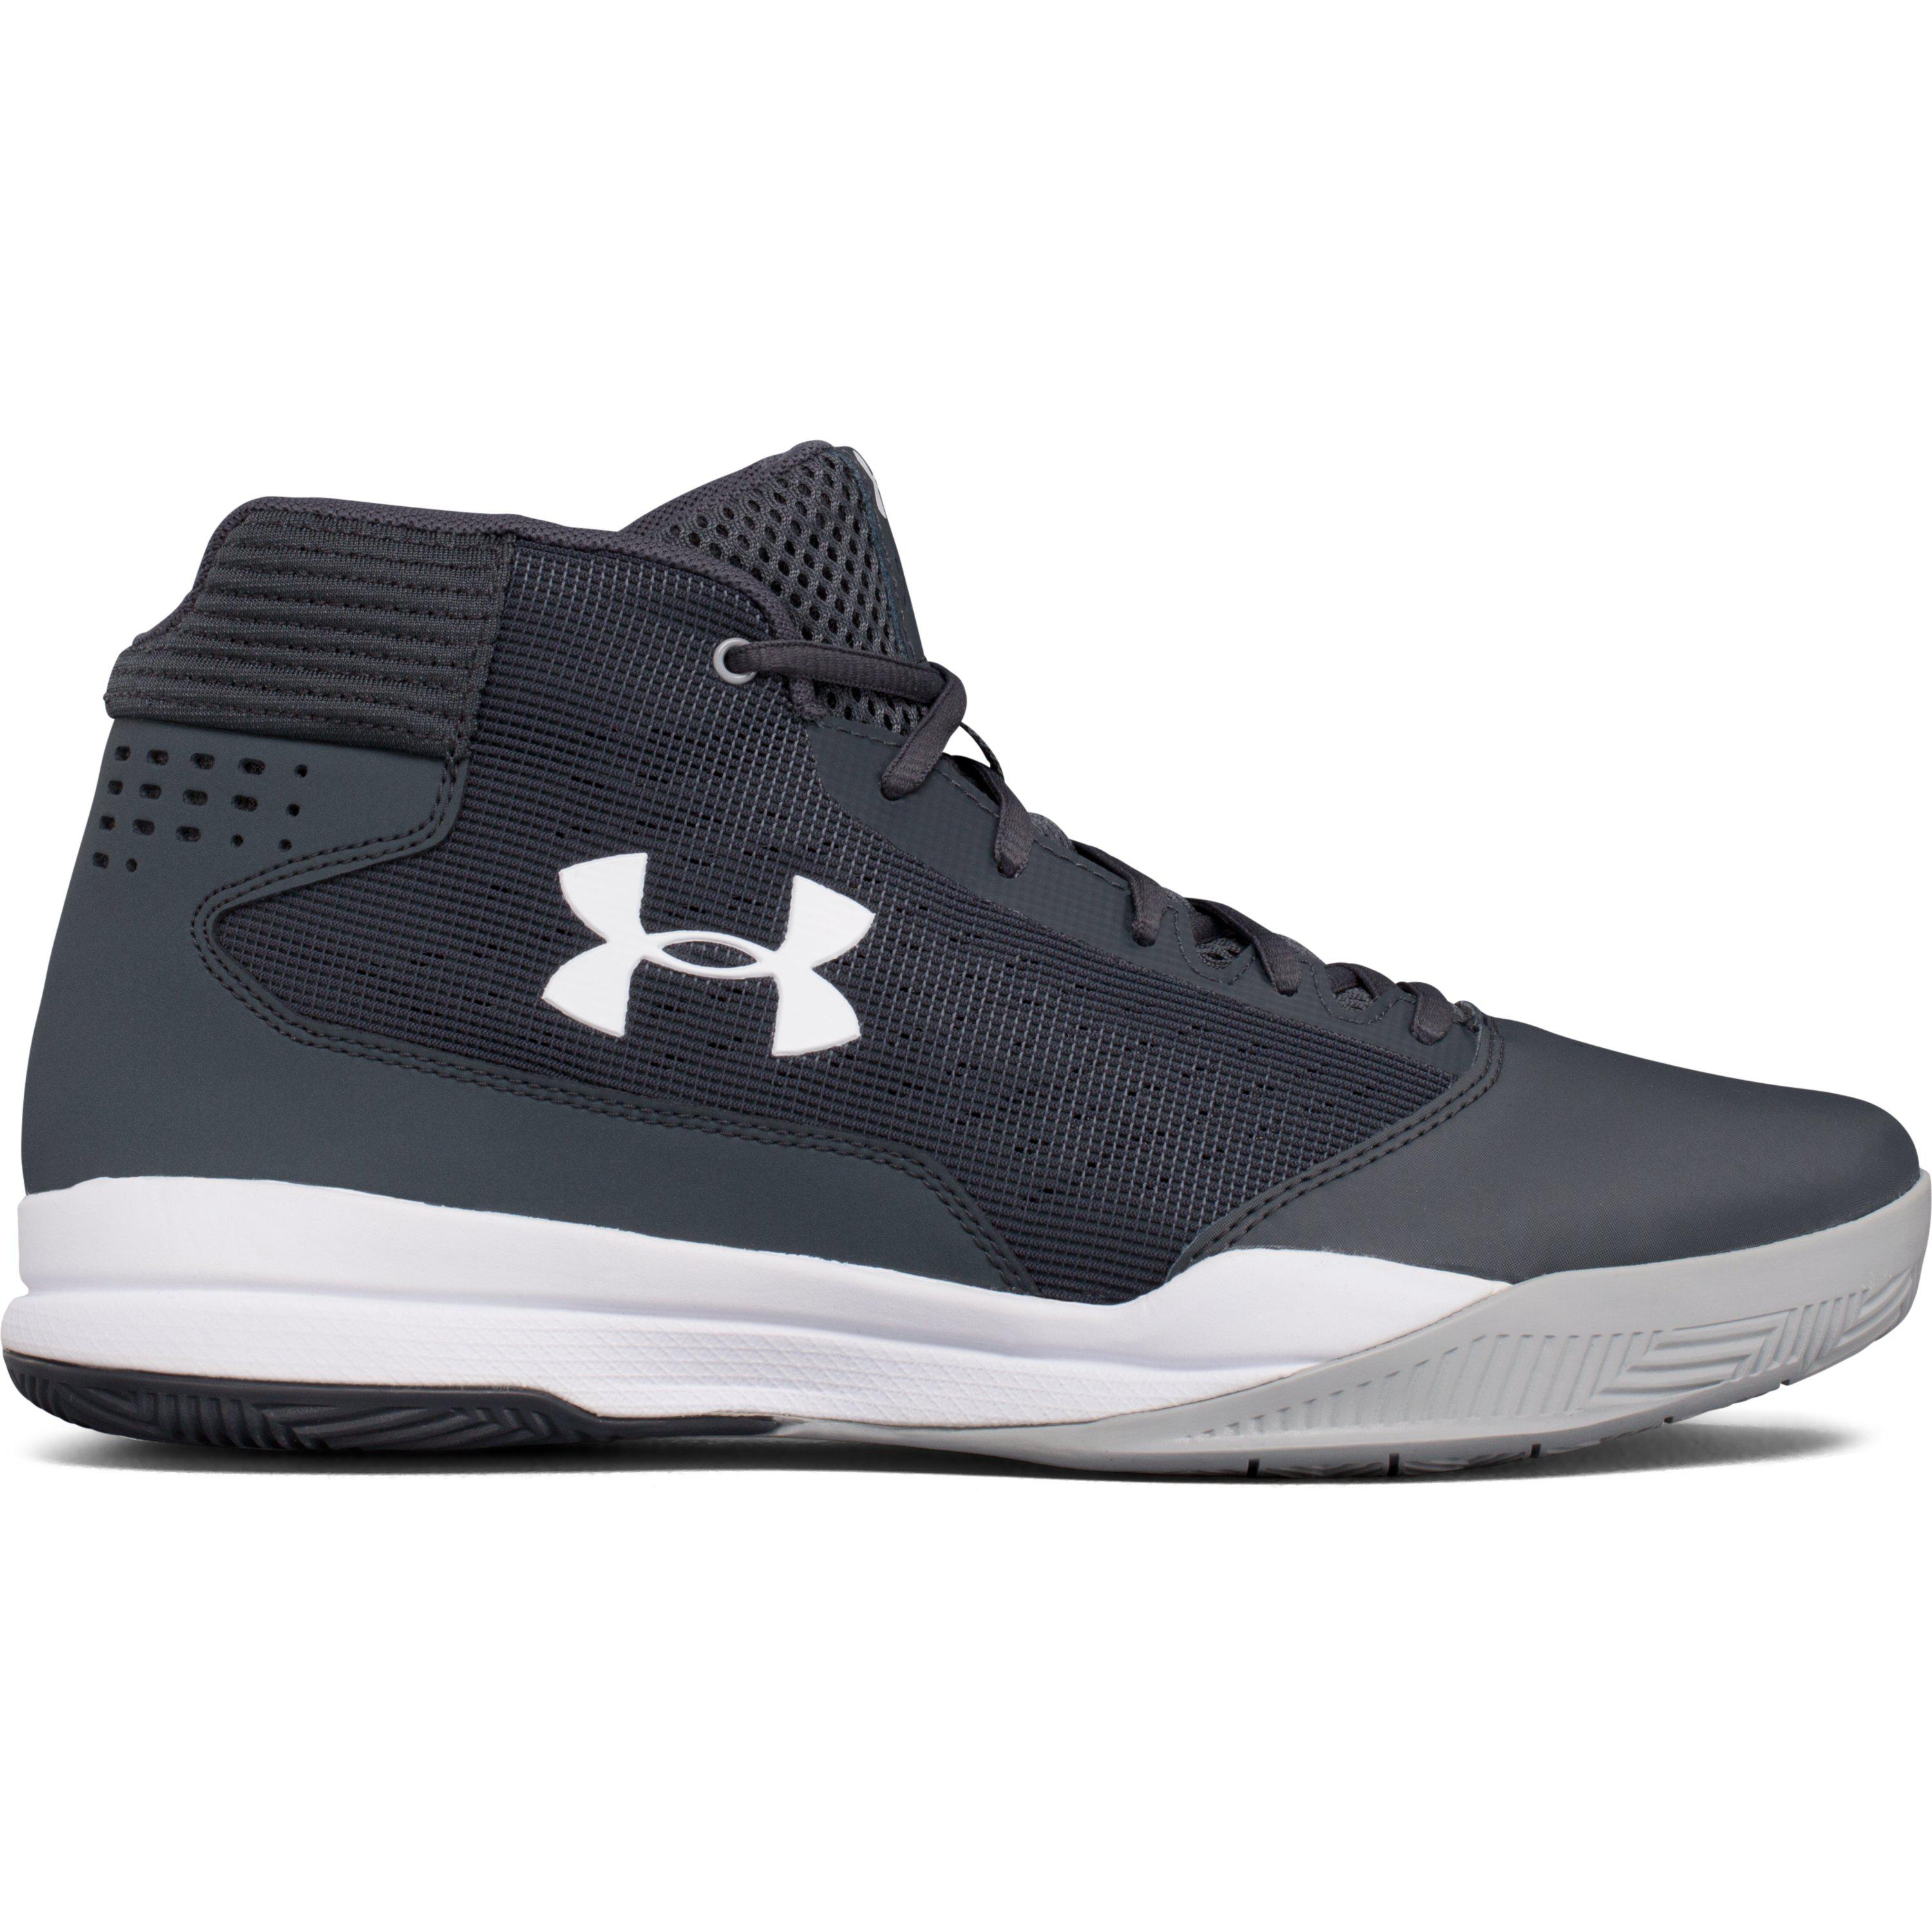 Under Armour Running Shoes 2017 - almoire